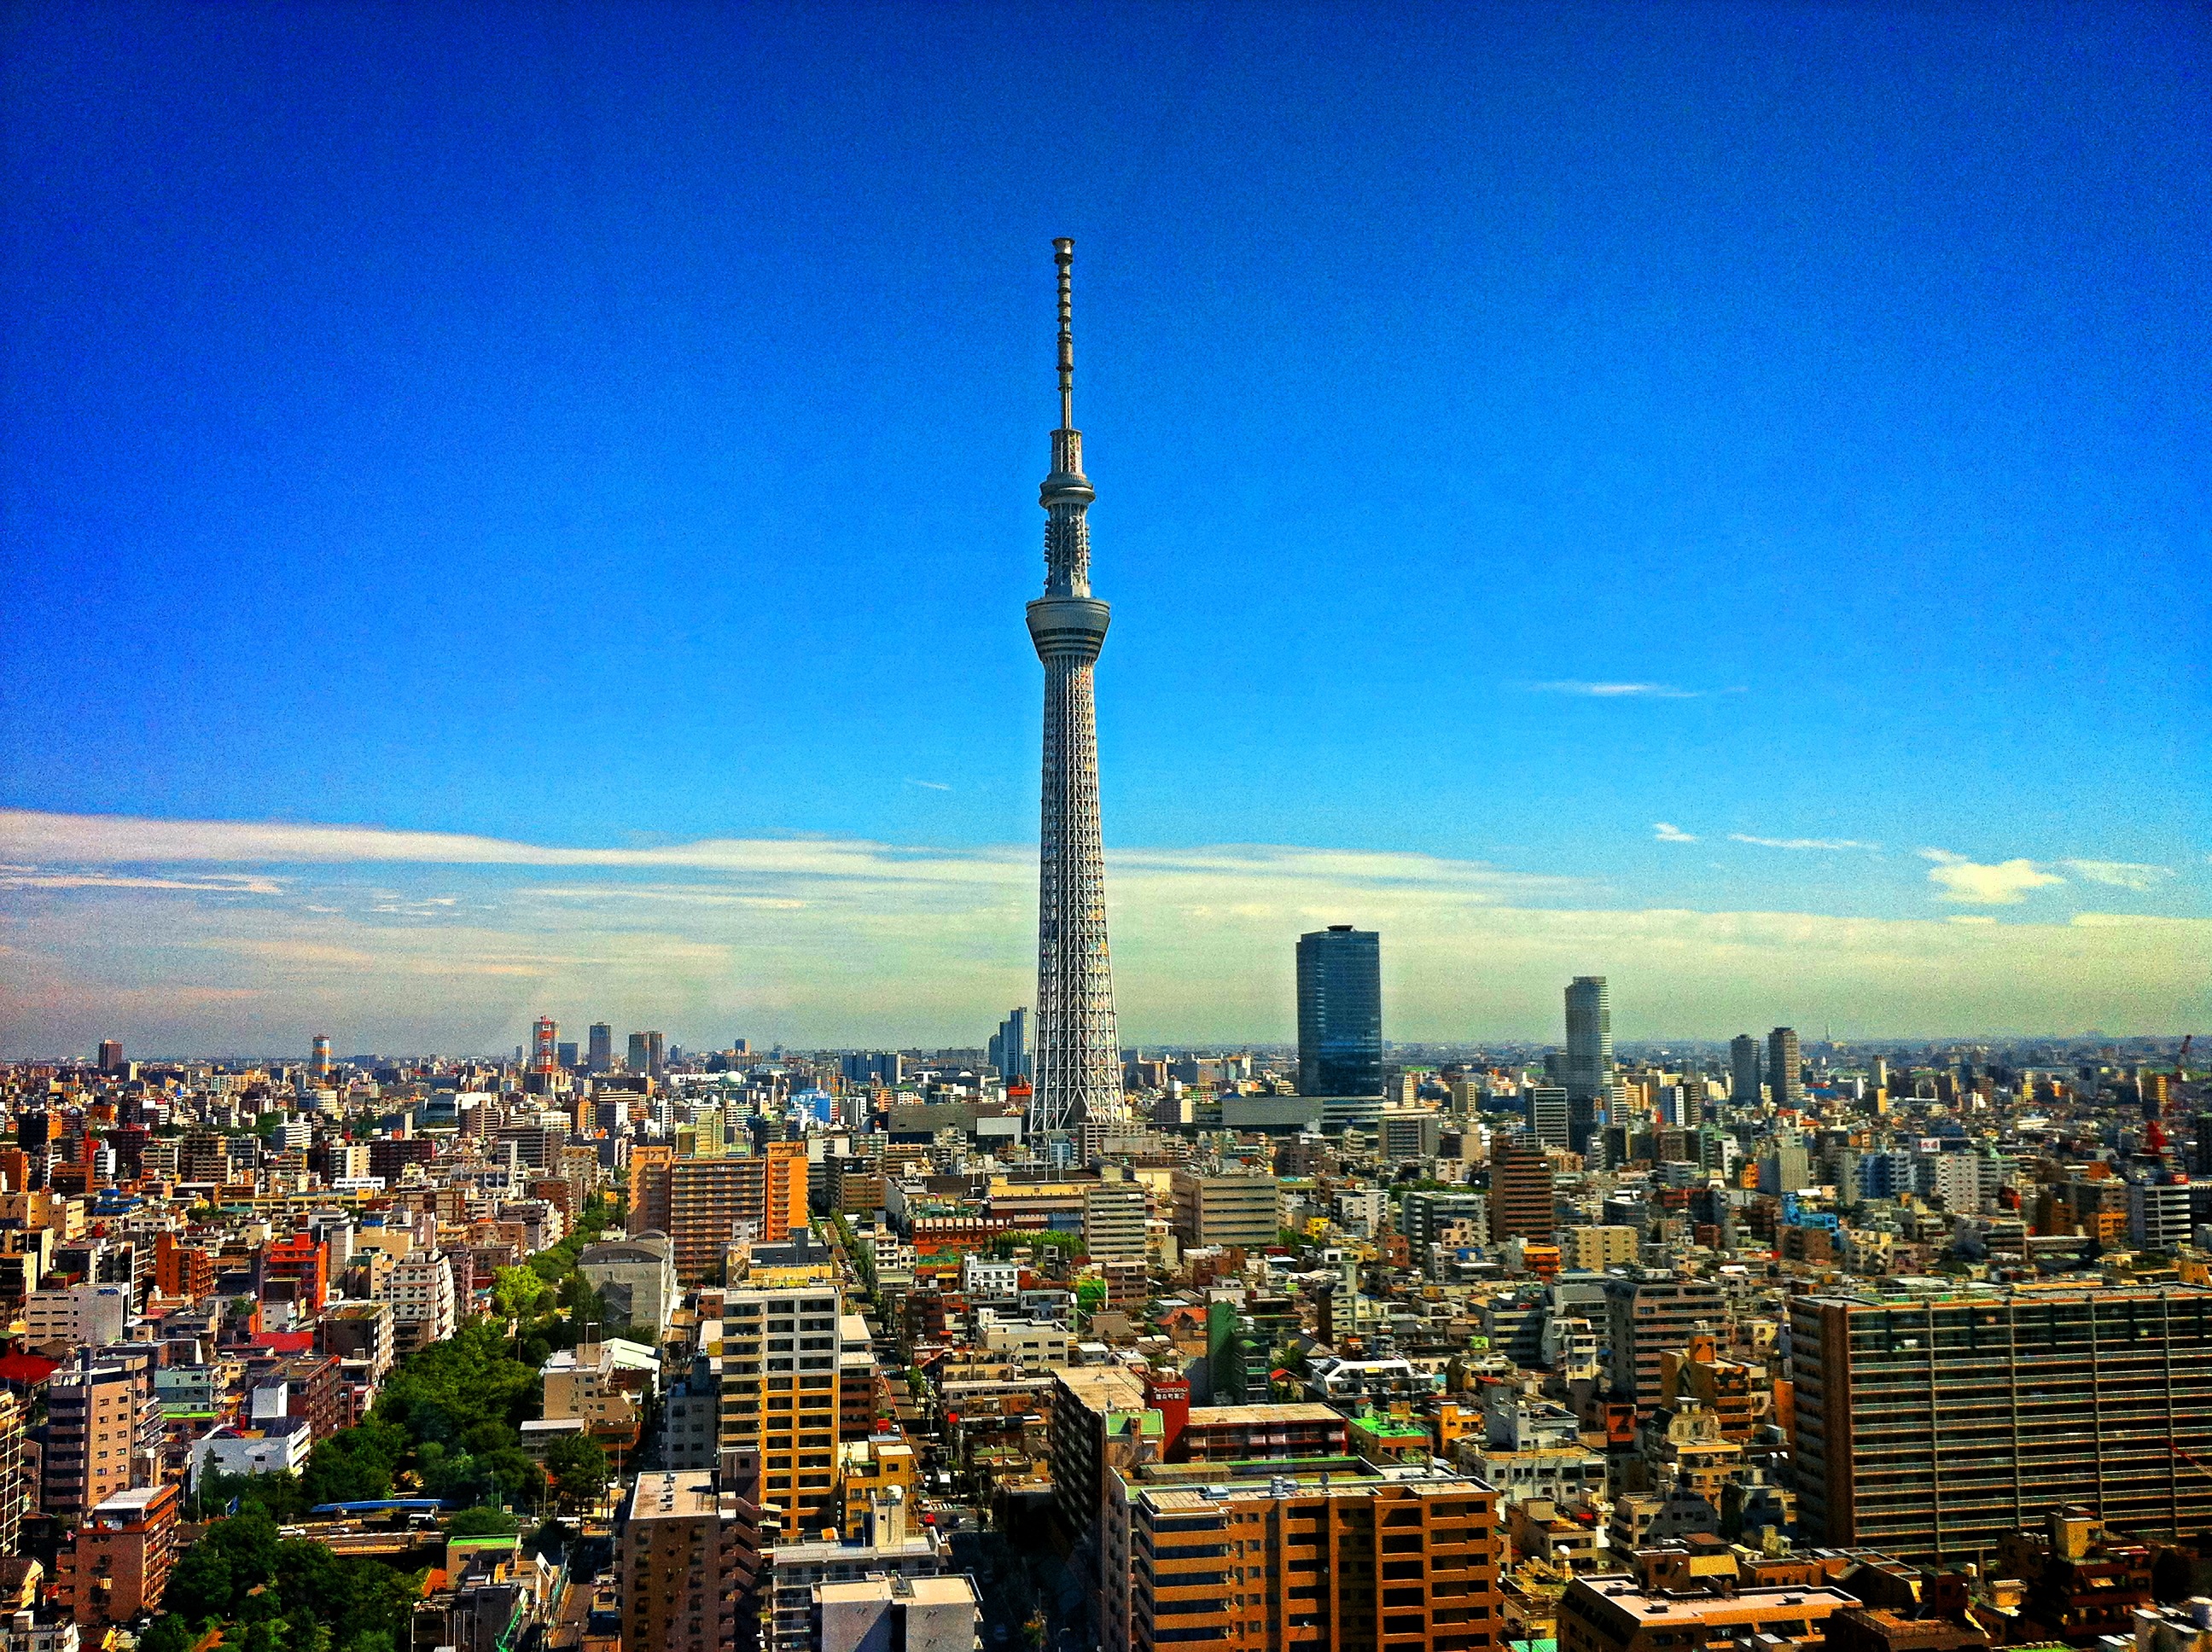 Cityview with skyree in the middle in Tokyo, Japan image - Free stock photo - Public Domain ...